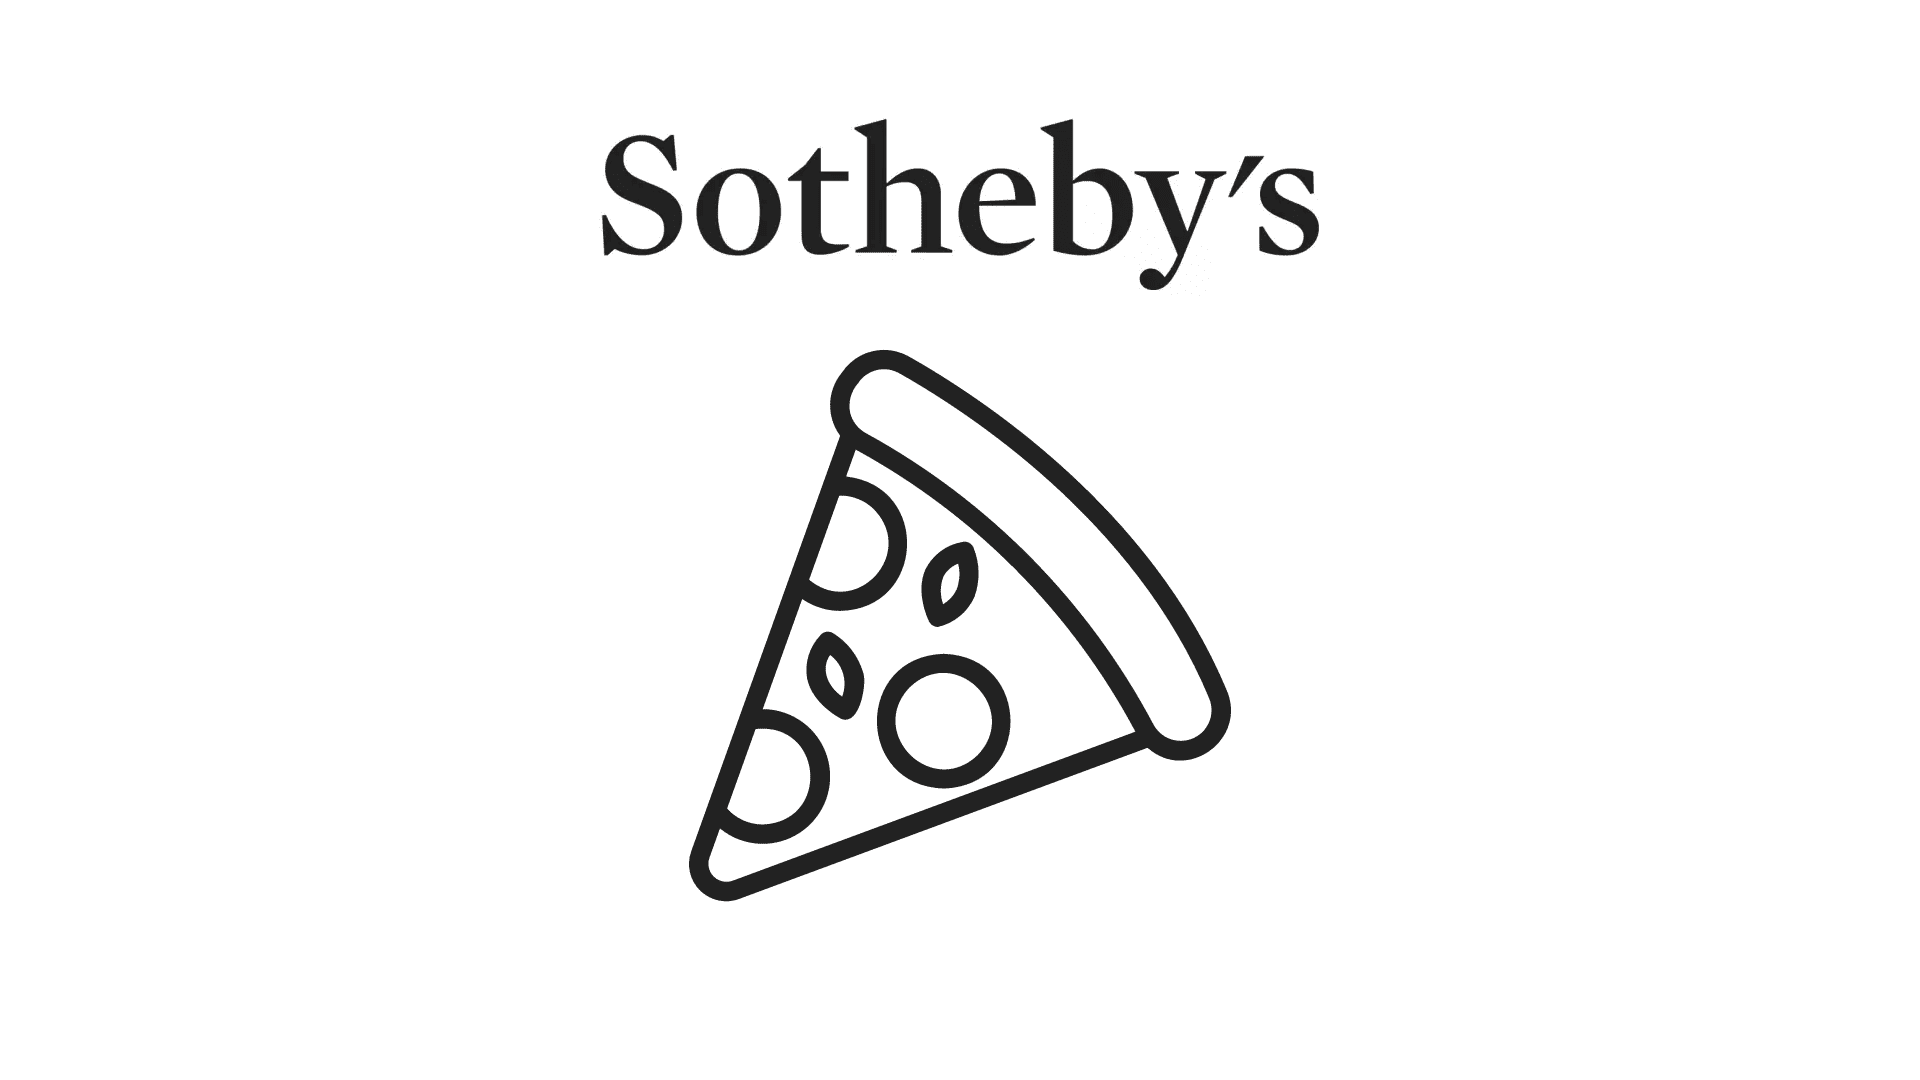 Pizza Ninjas Makes a Historic Entry into Sotheby’s: A Milestone for Web3 Art